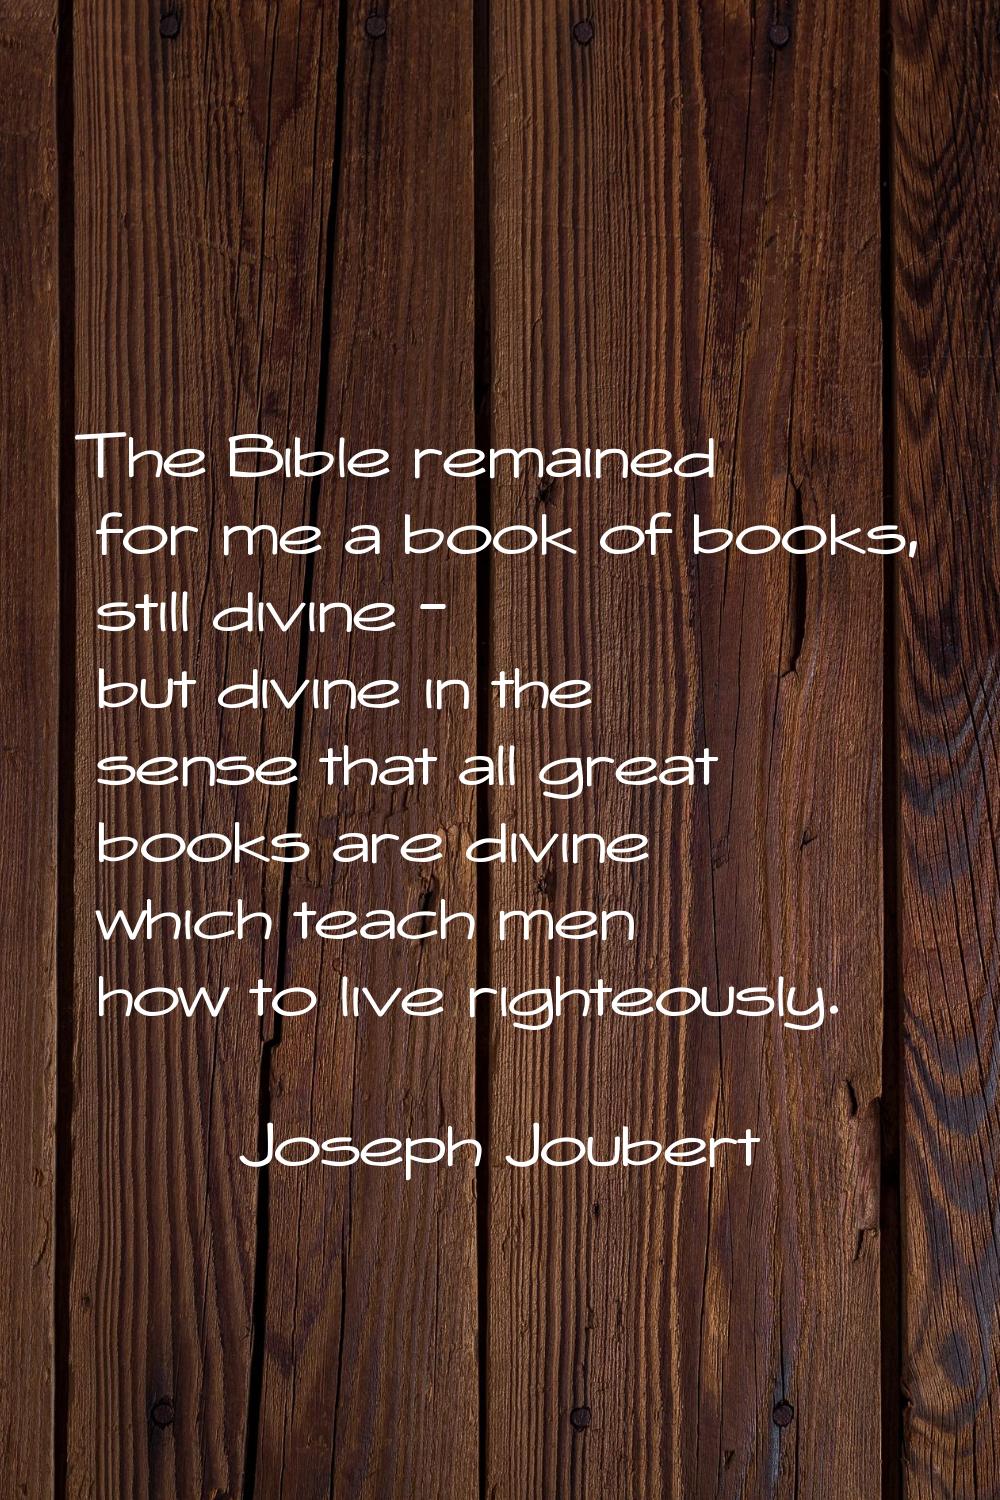 The Bible remained for me a book of books, still divine - but divine in the sense that all great bo